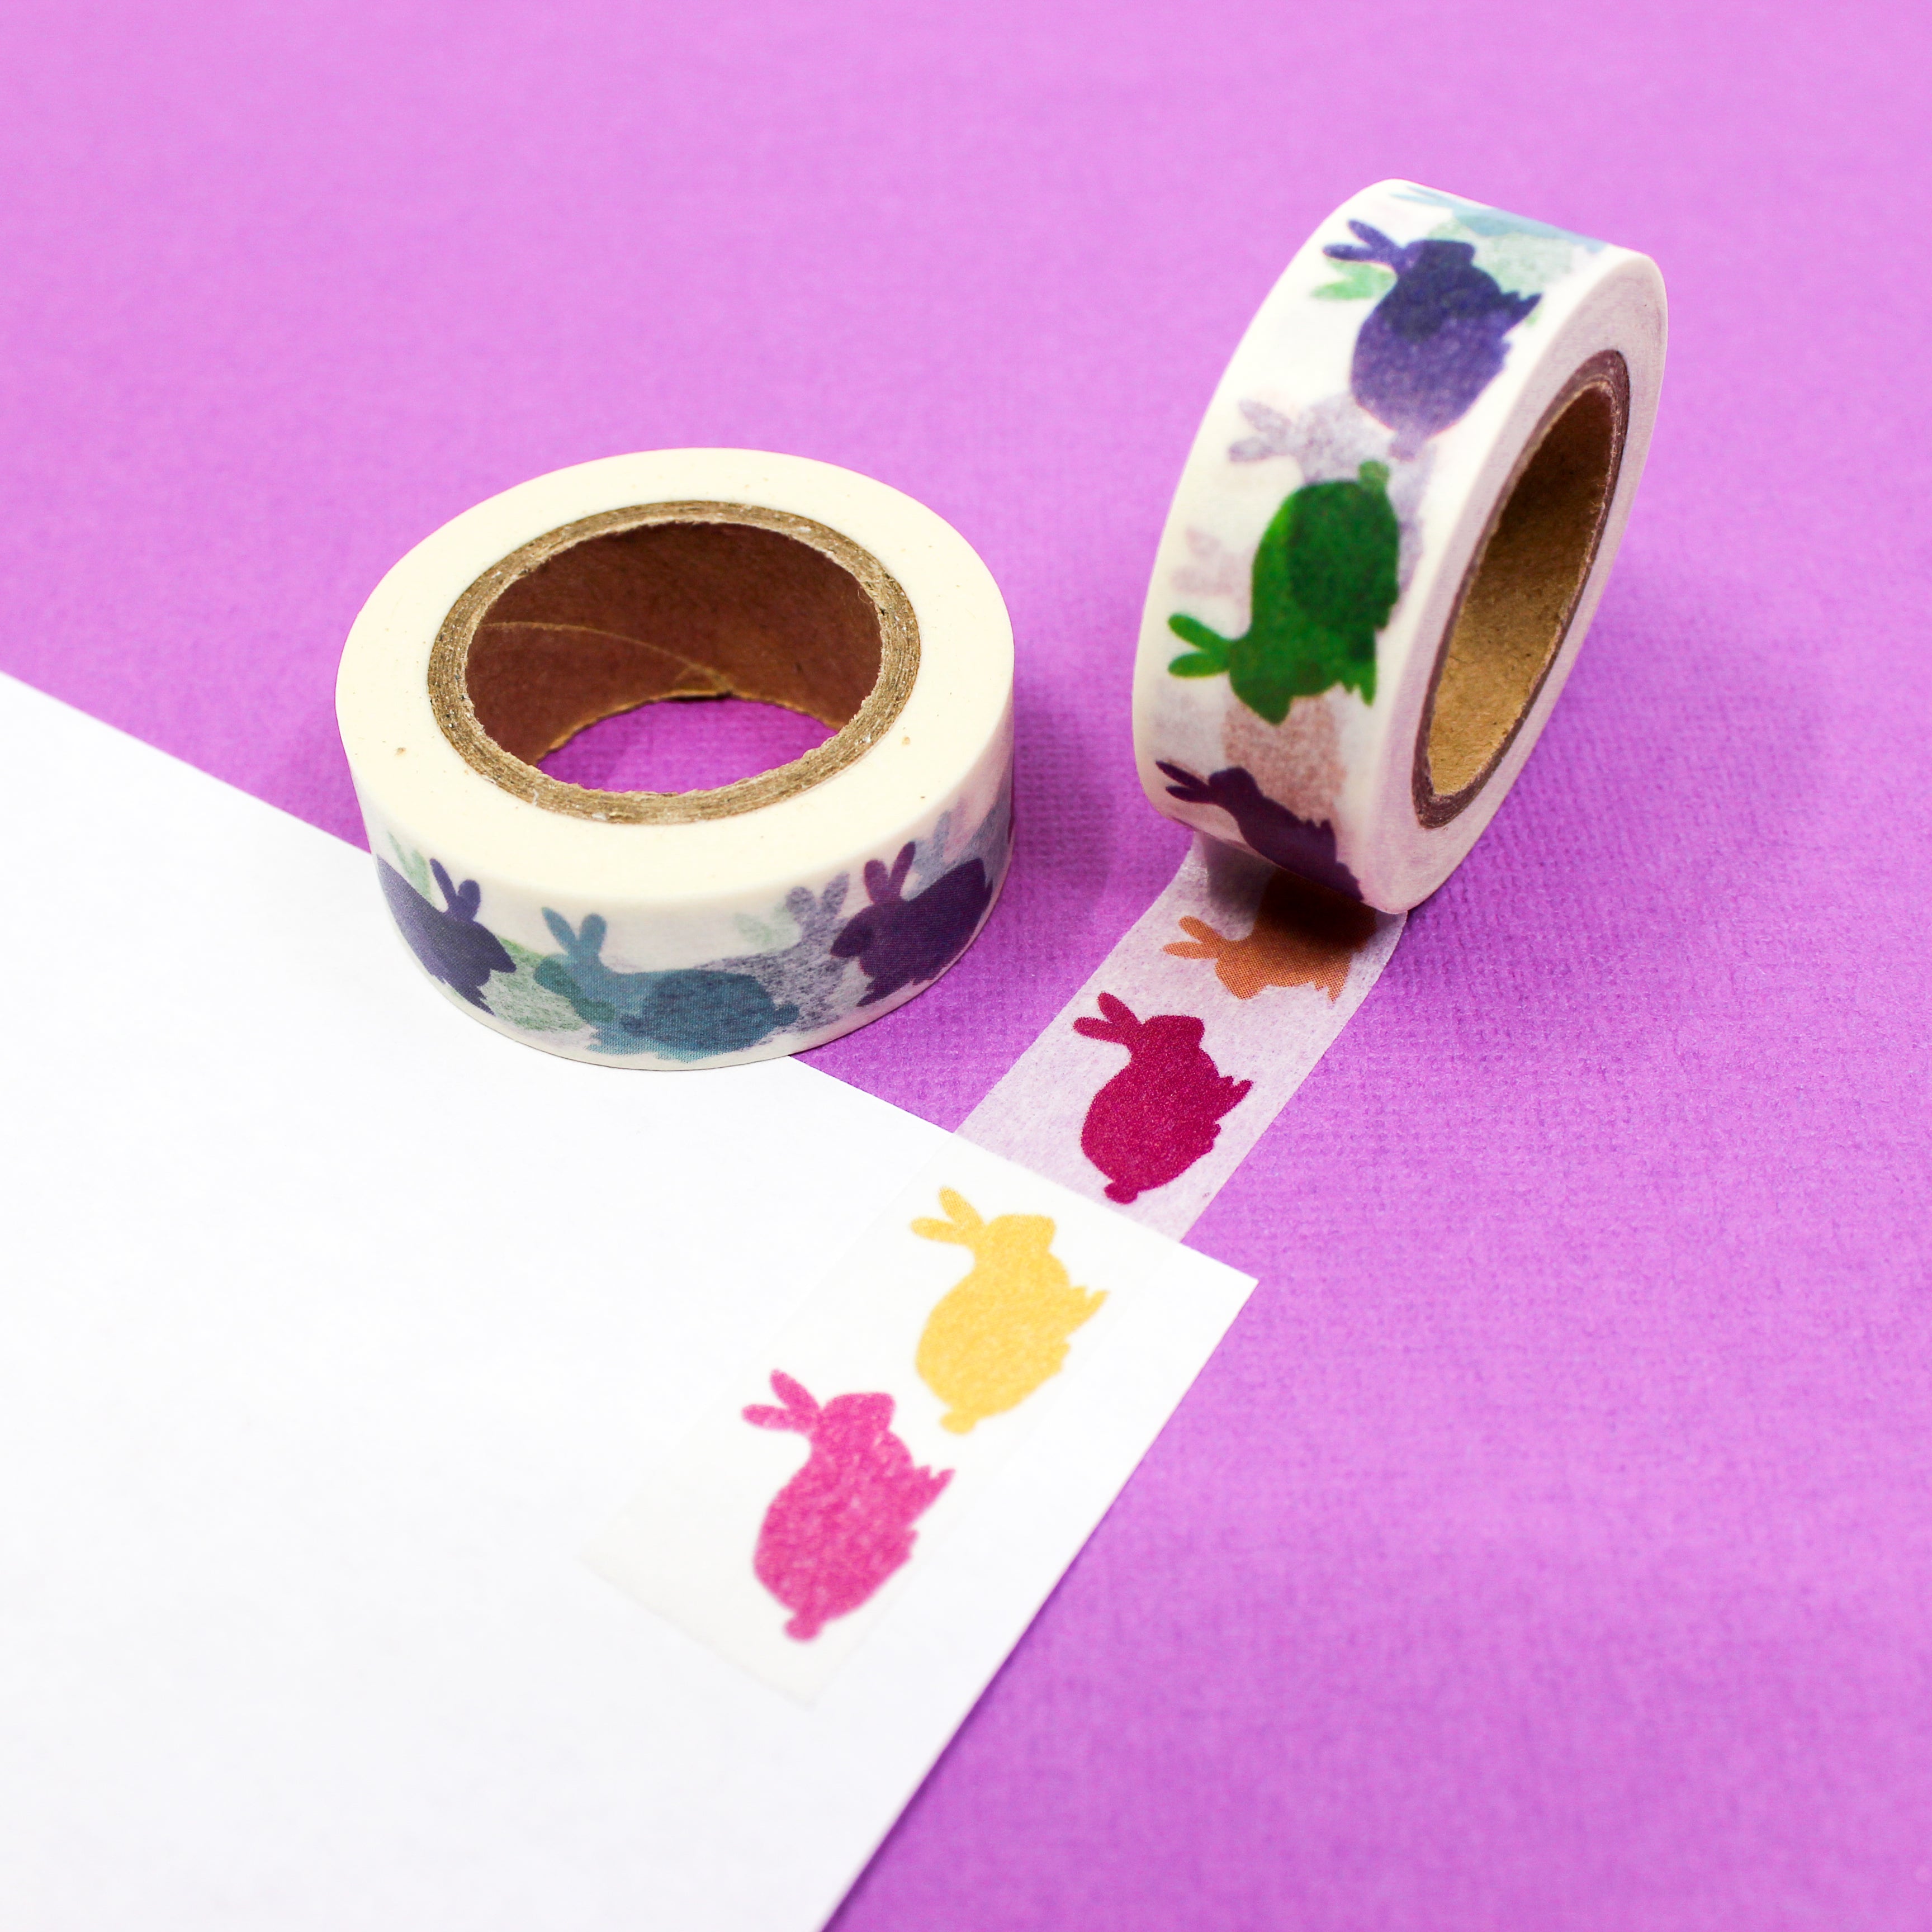 This is a colorful rabbits washi tape from BBB Supplies Craft Shop